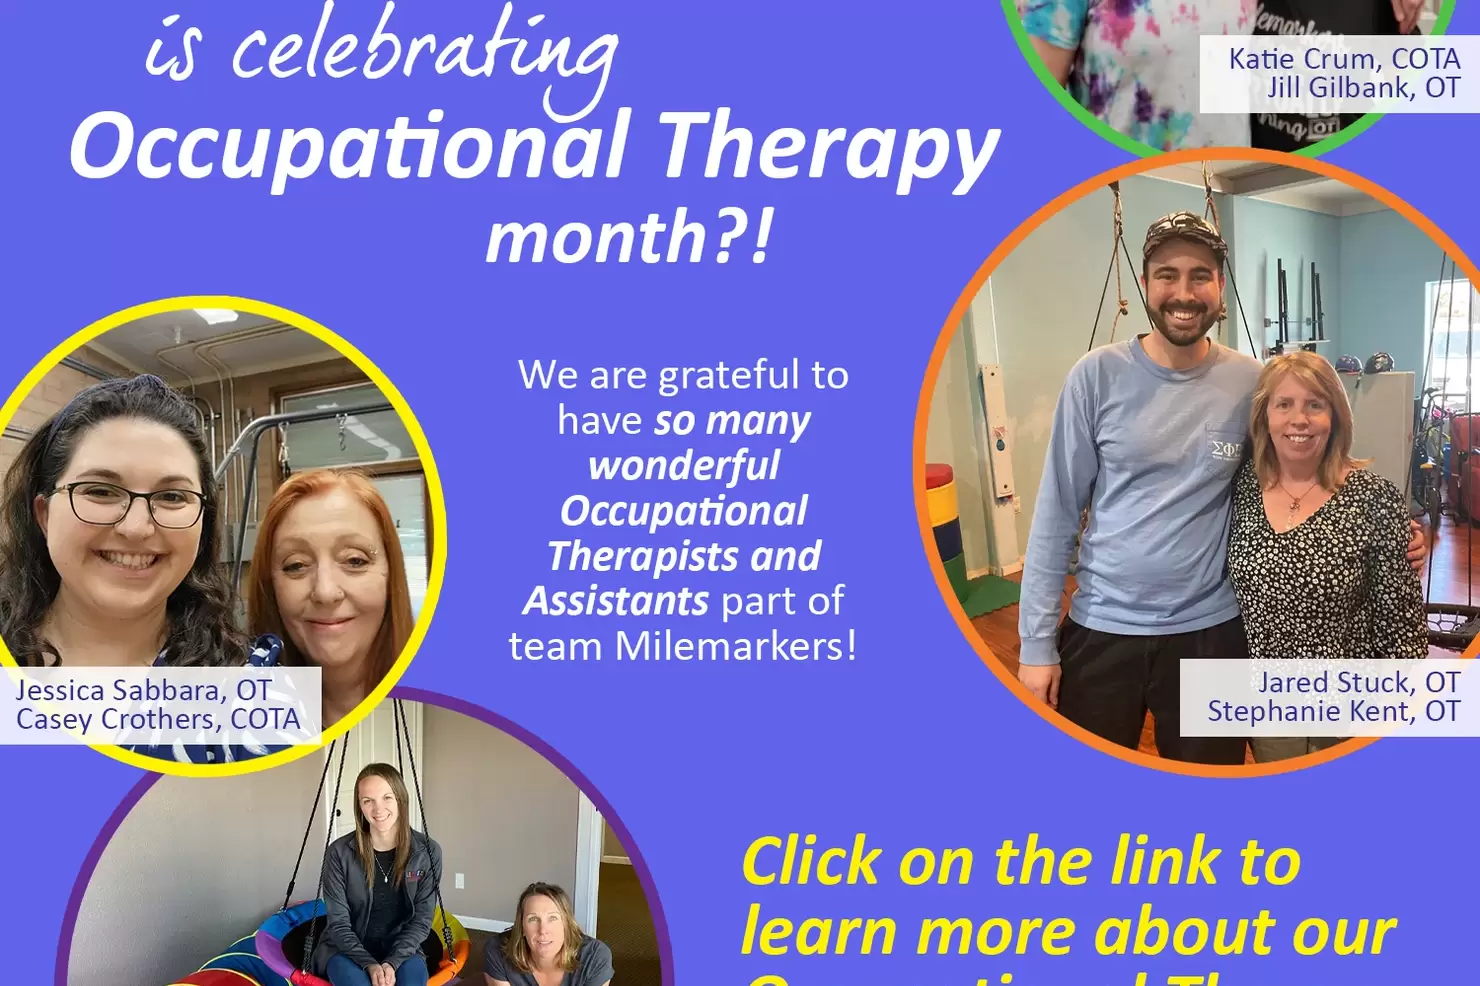 Get to know our Occupational Therapy Team!